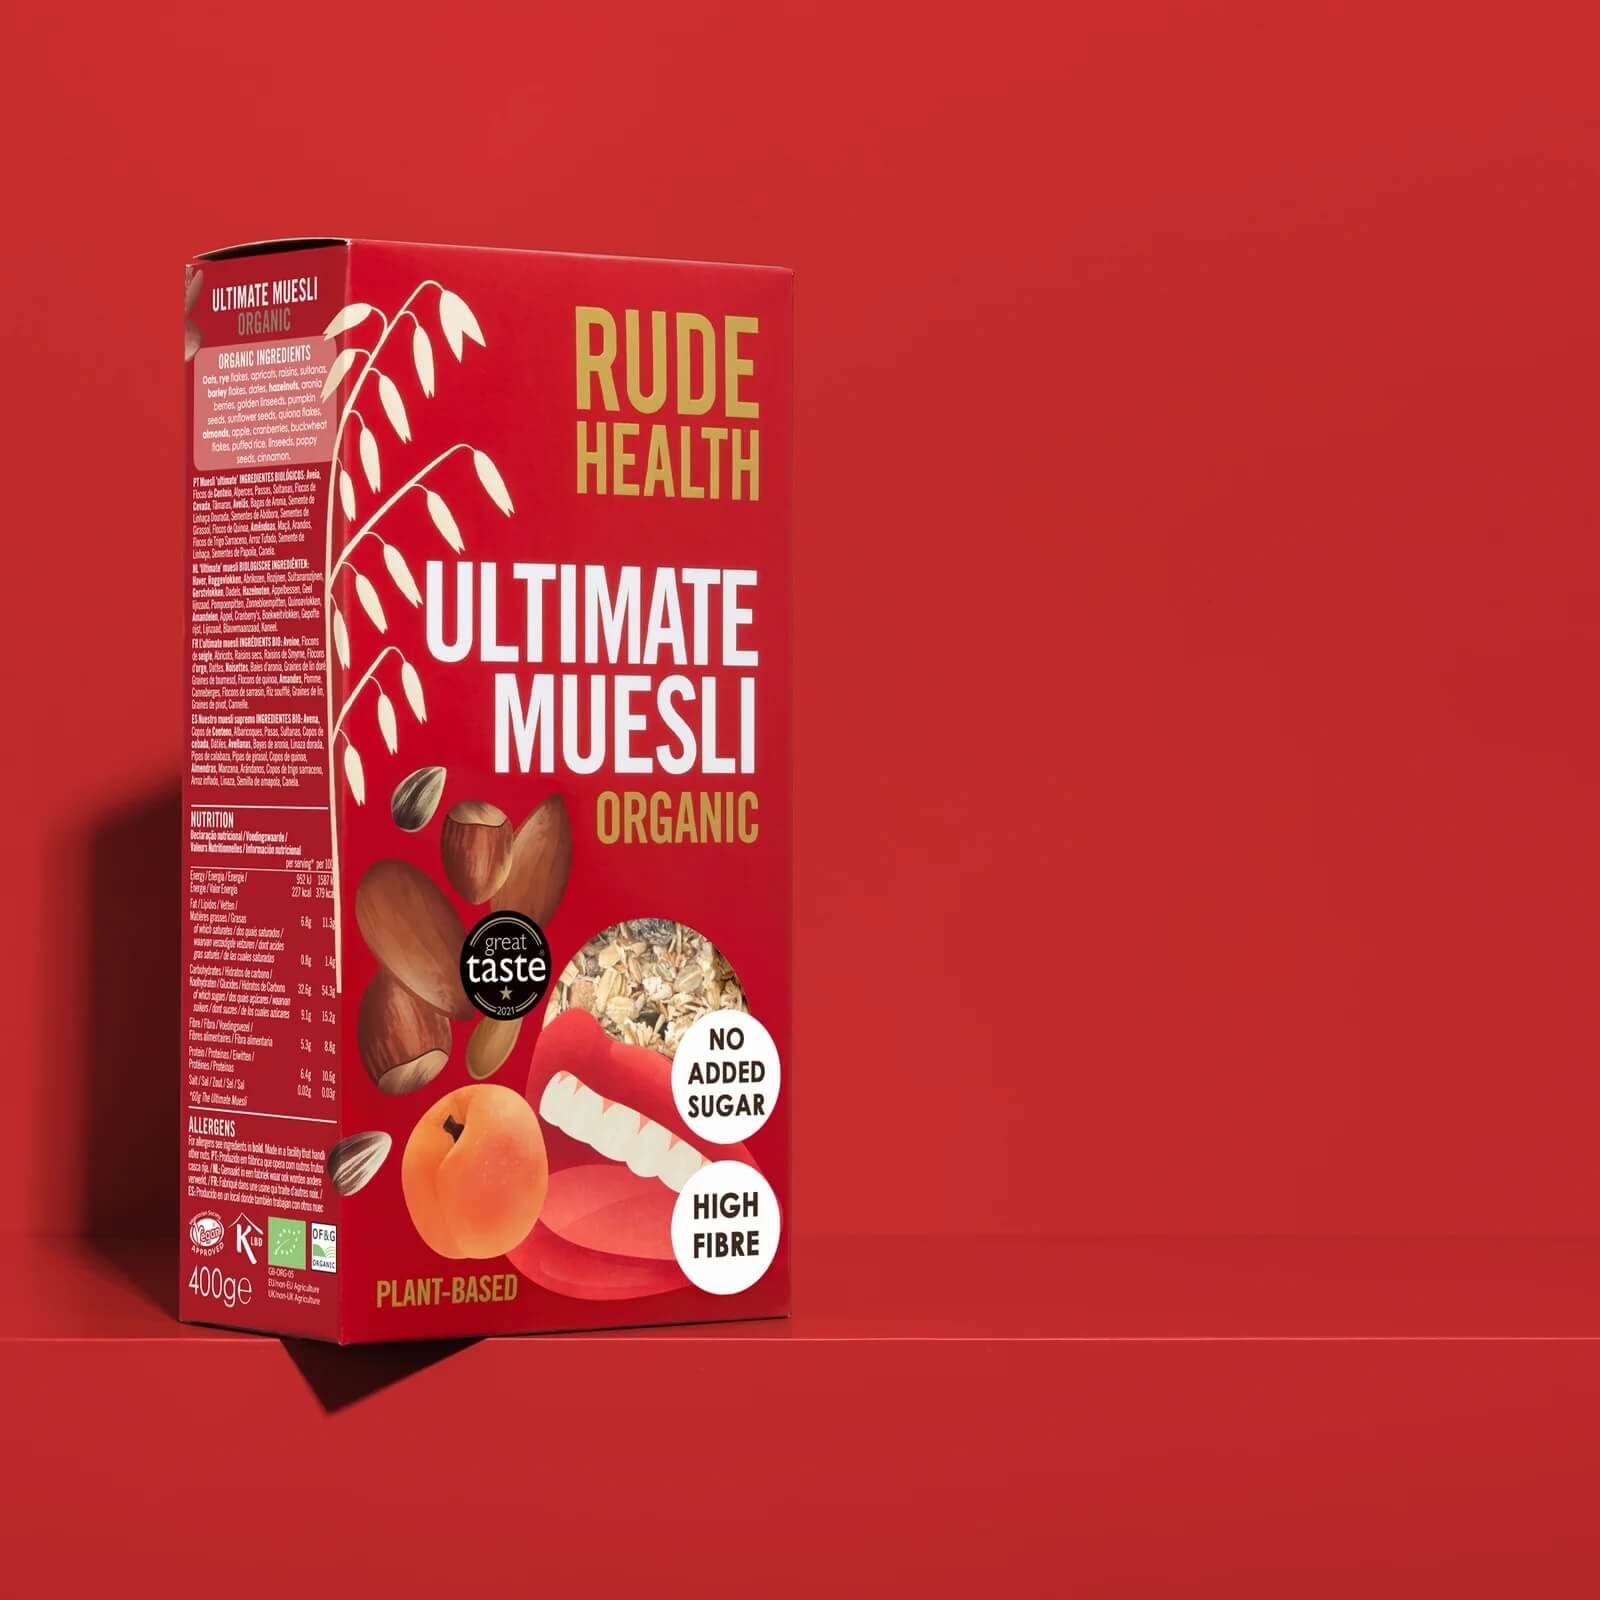 Image of The Ultimate Muesli made in the UK by Rude Health. Buying this product supports a UK business, jobs and the local community